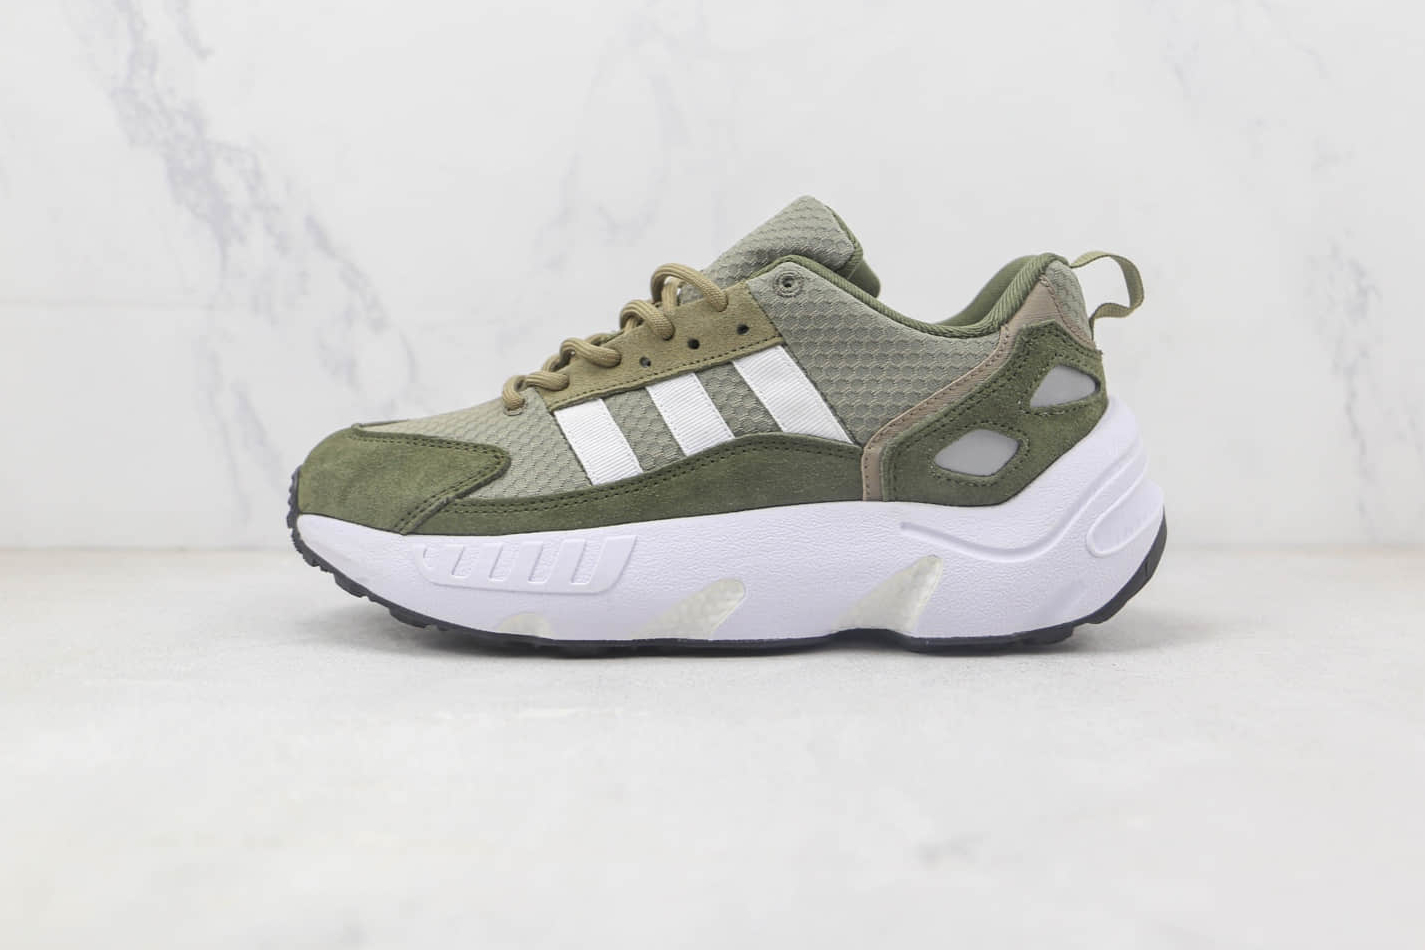 Adidas ZX 22 BOOST in Orbit Green, Cloud White, and Olive - GX2040